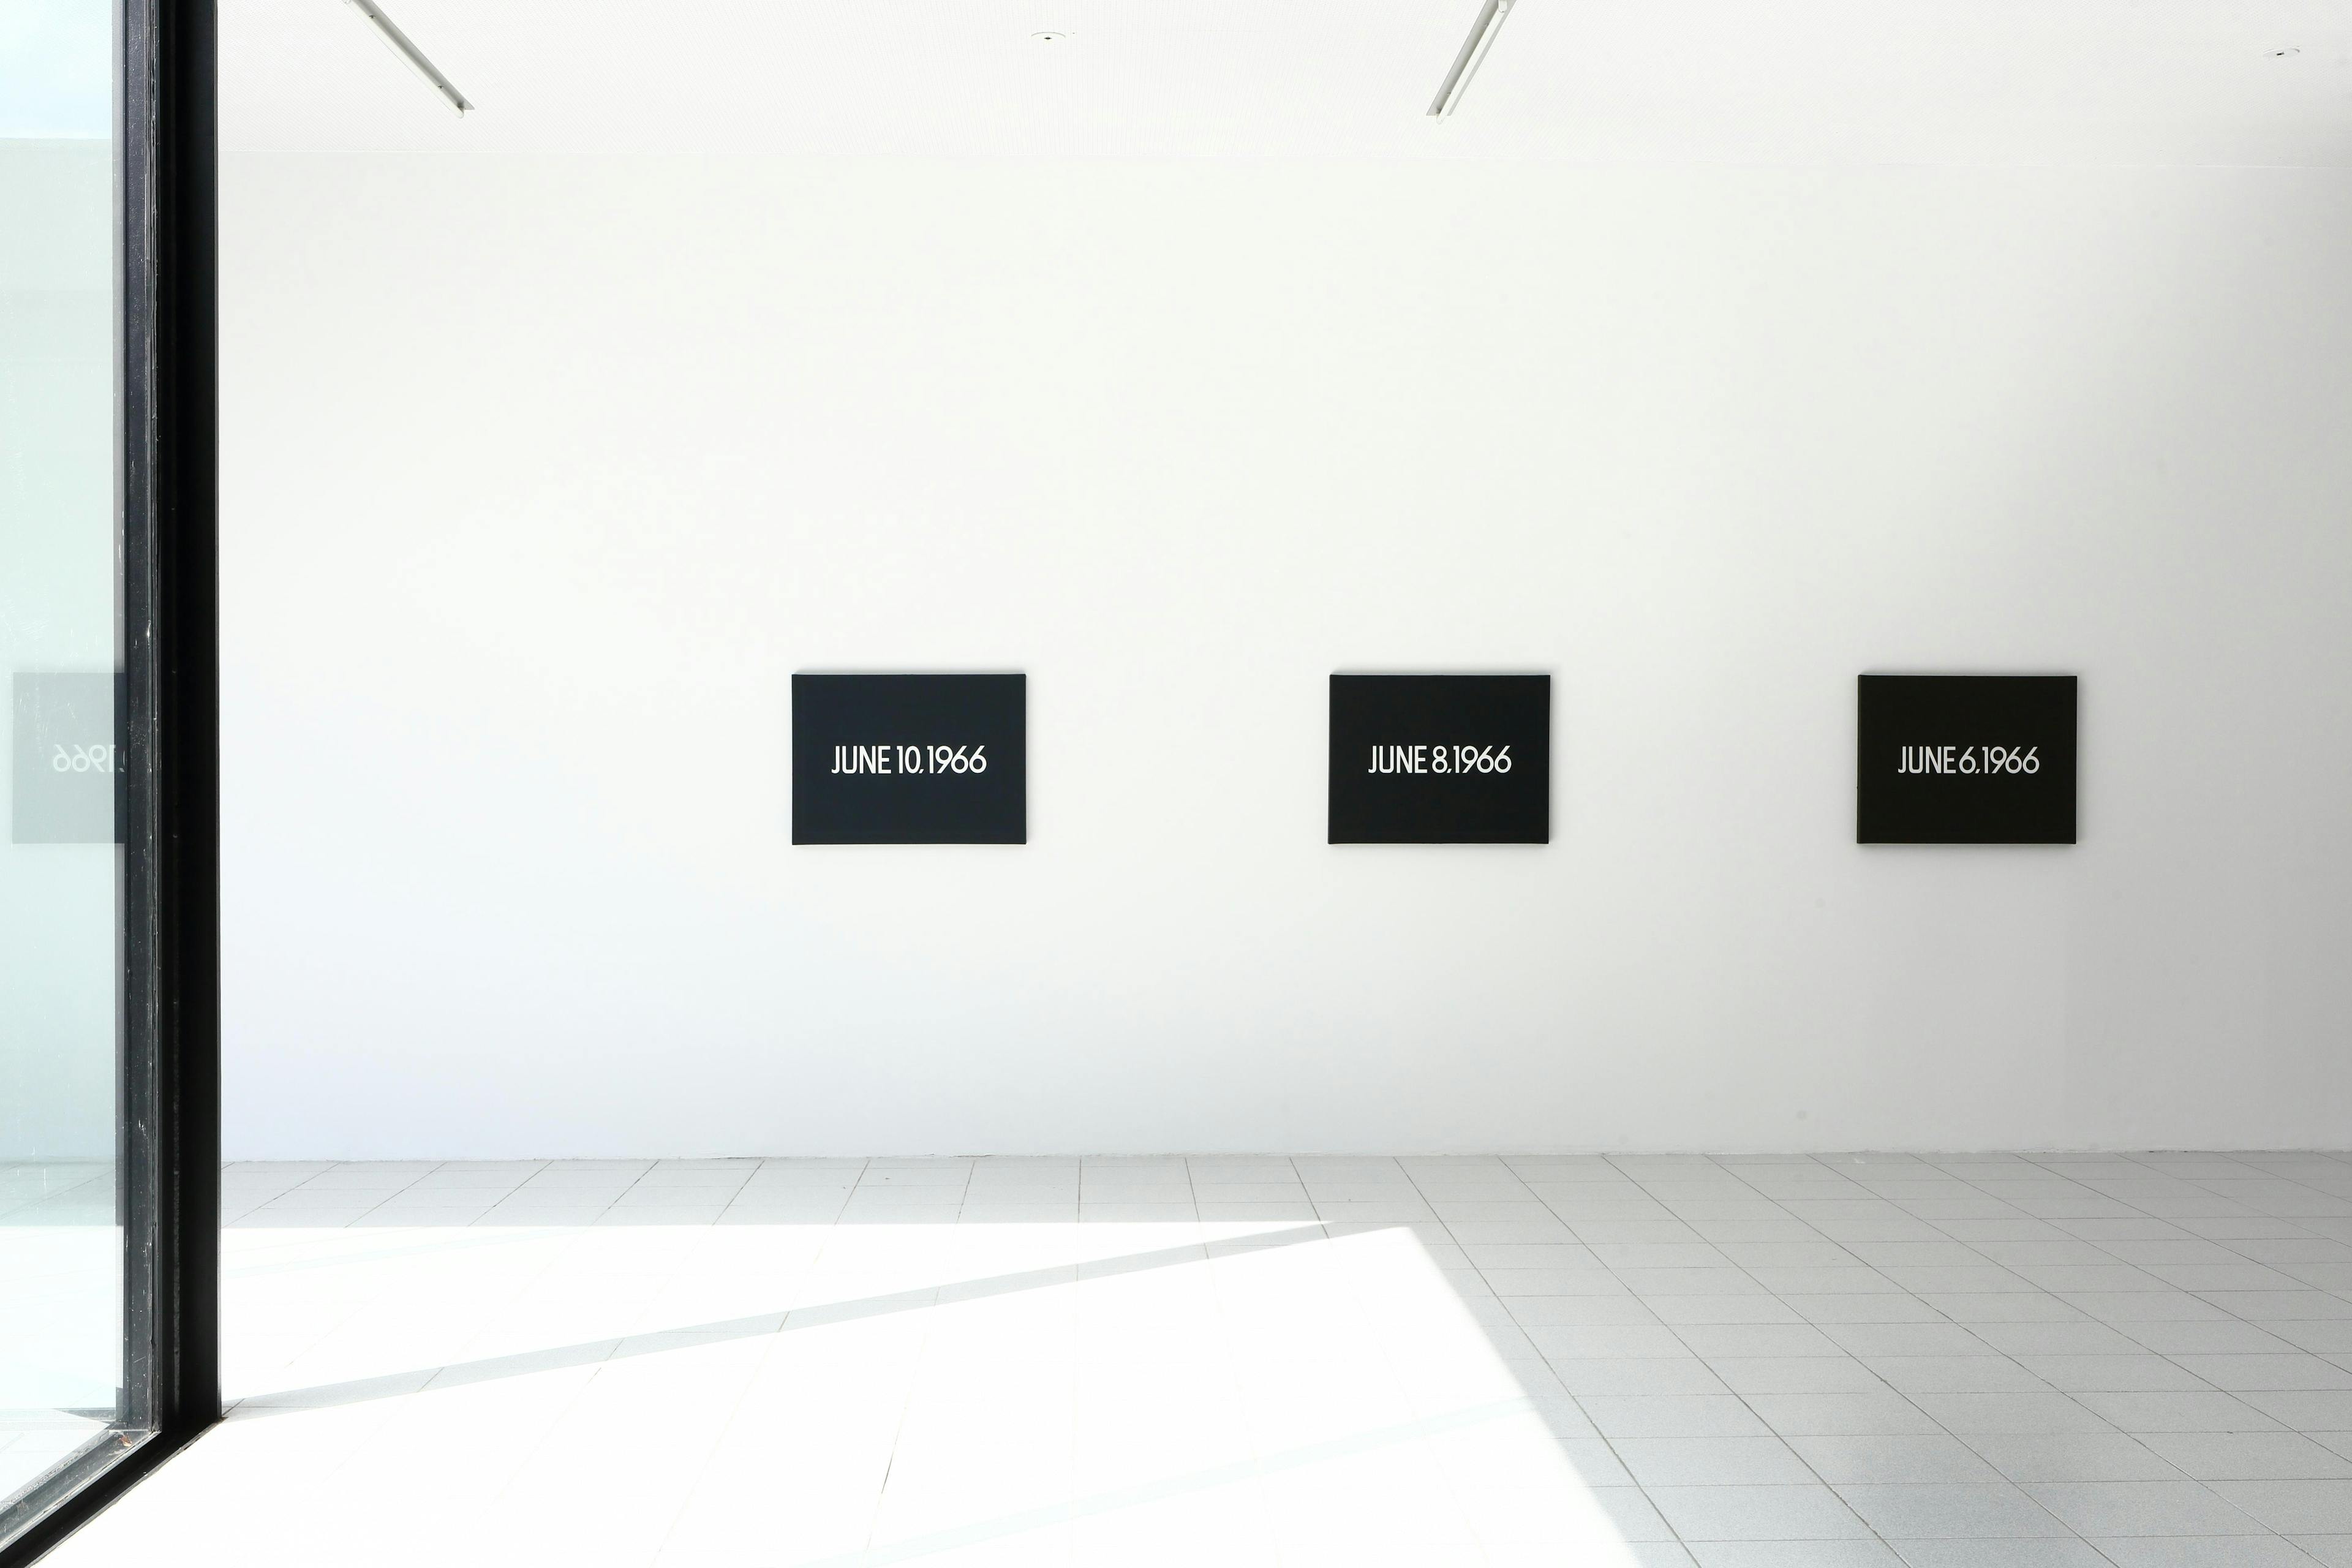 Installation view of the exhibition, ON KAWARA 1966, at The Museum Dhondt-Dhaenens in Sint-Martens-Latem, Belgium, dated 2015.